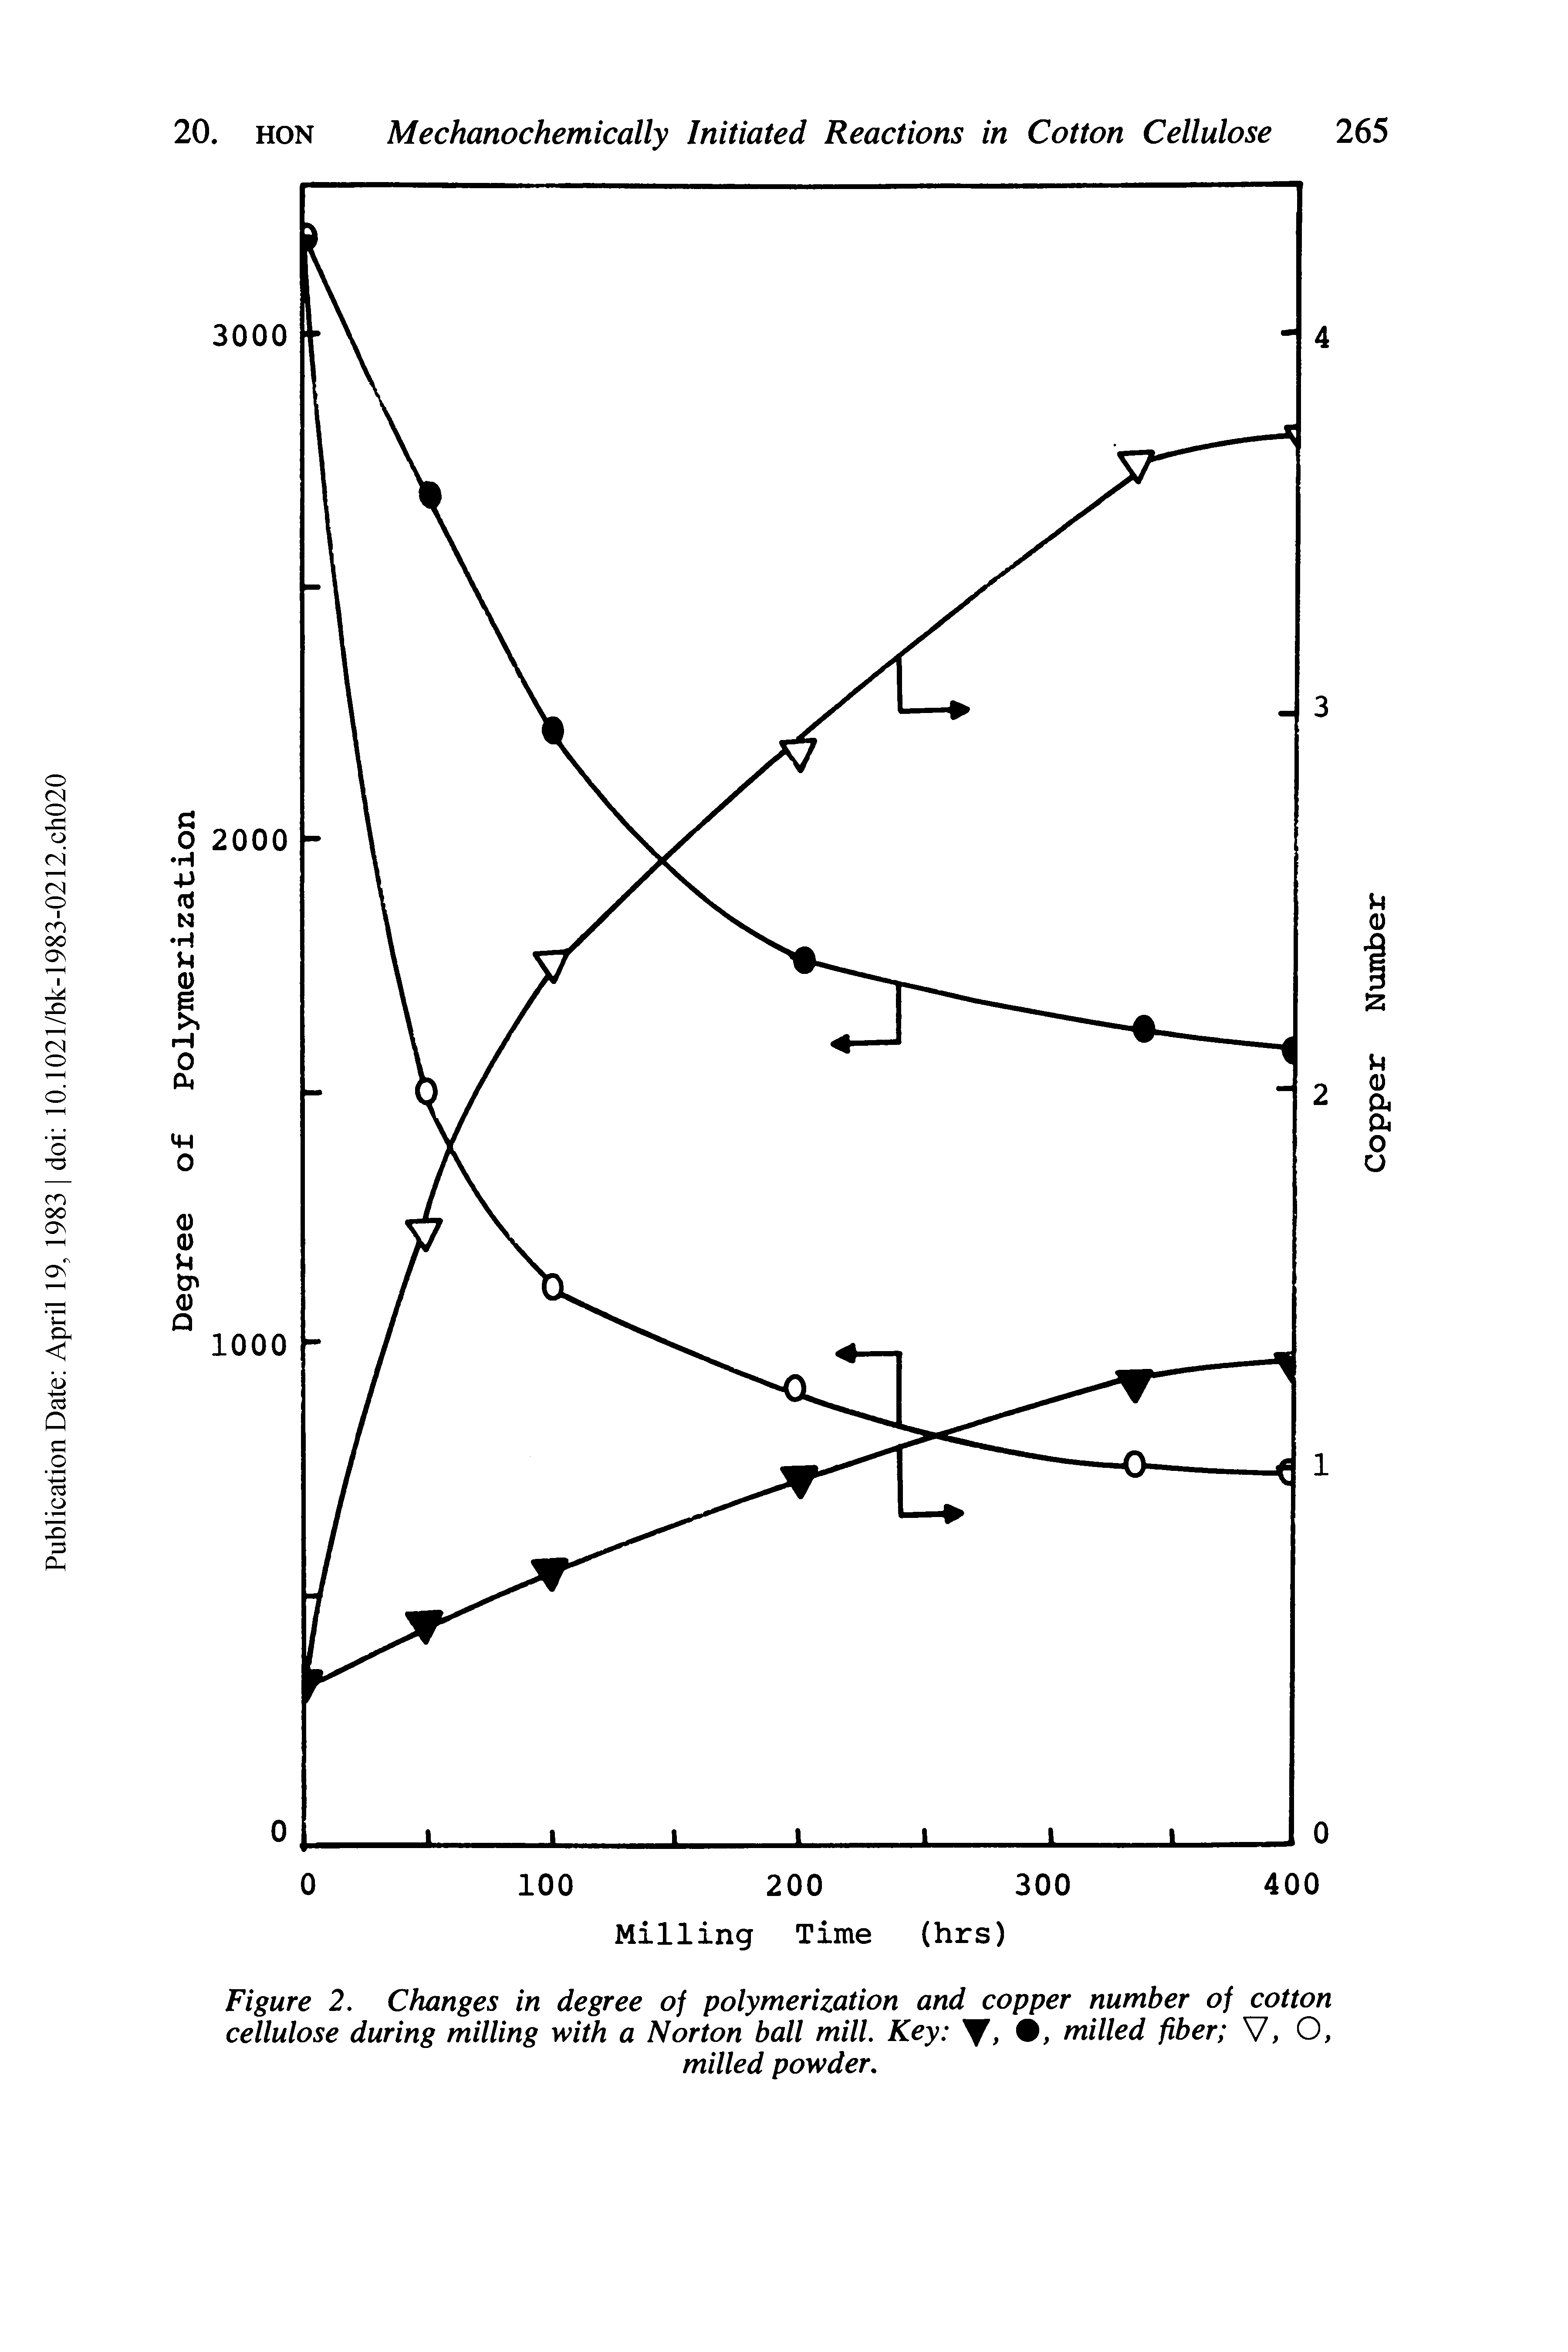 Figure 2. Changes in degree of polymerization and copper number of cotton cellulose during milling with a Norton ball mill. Key Y, milled fiber V, O,...